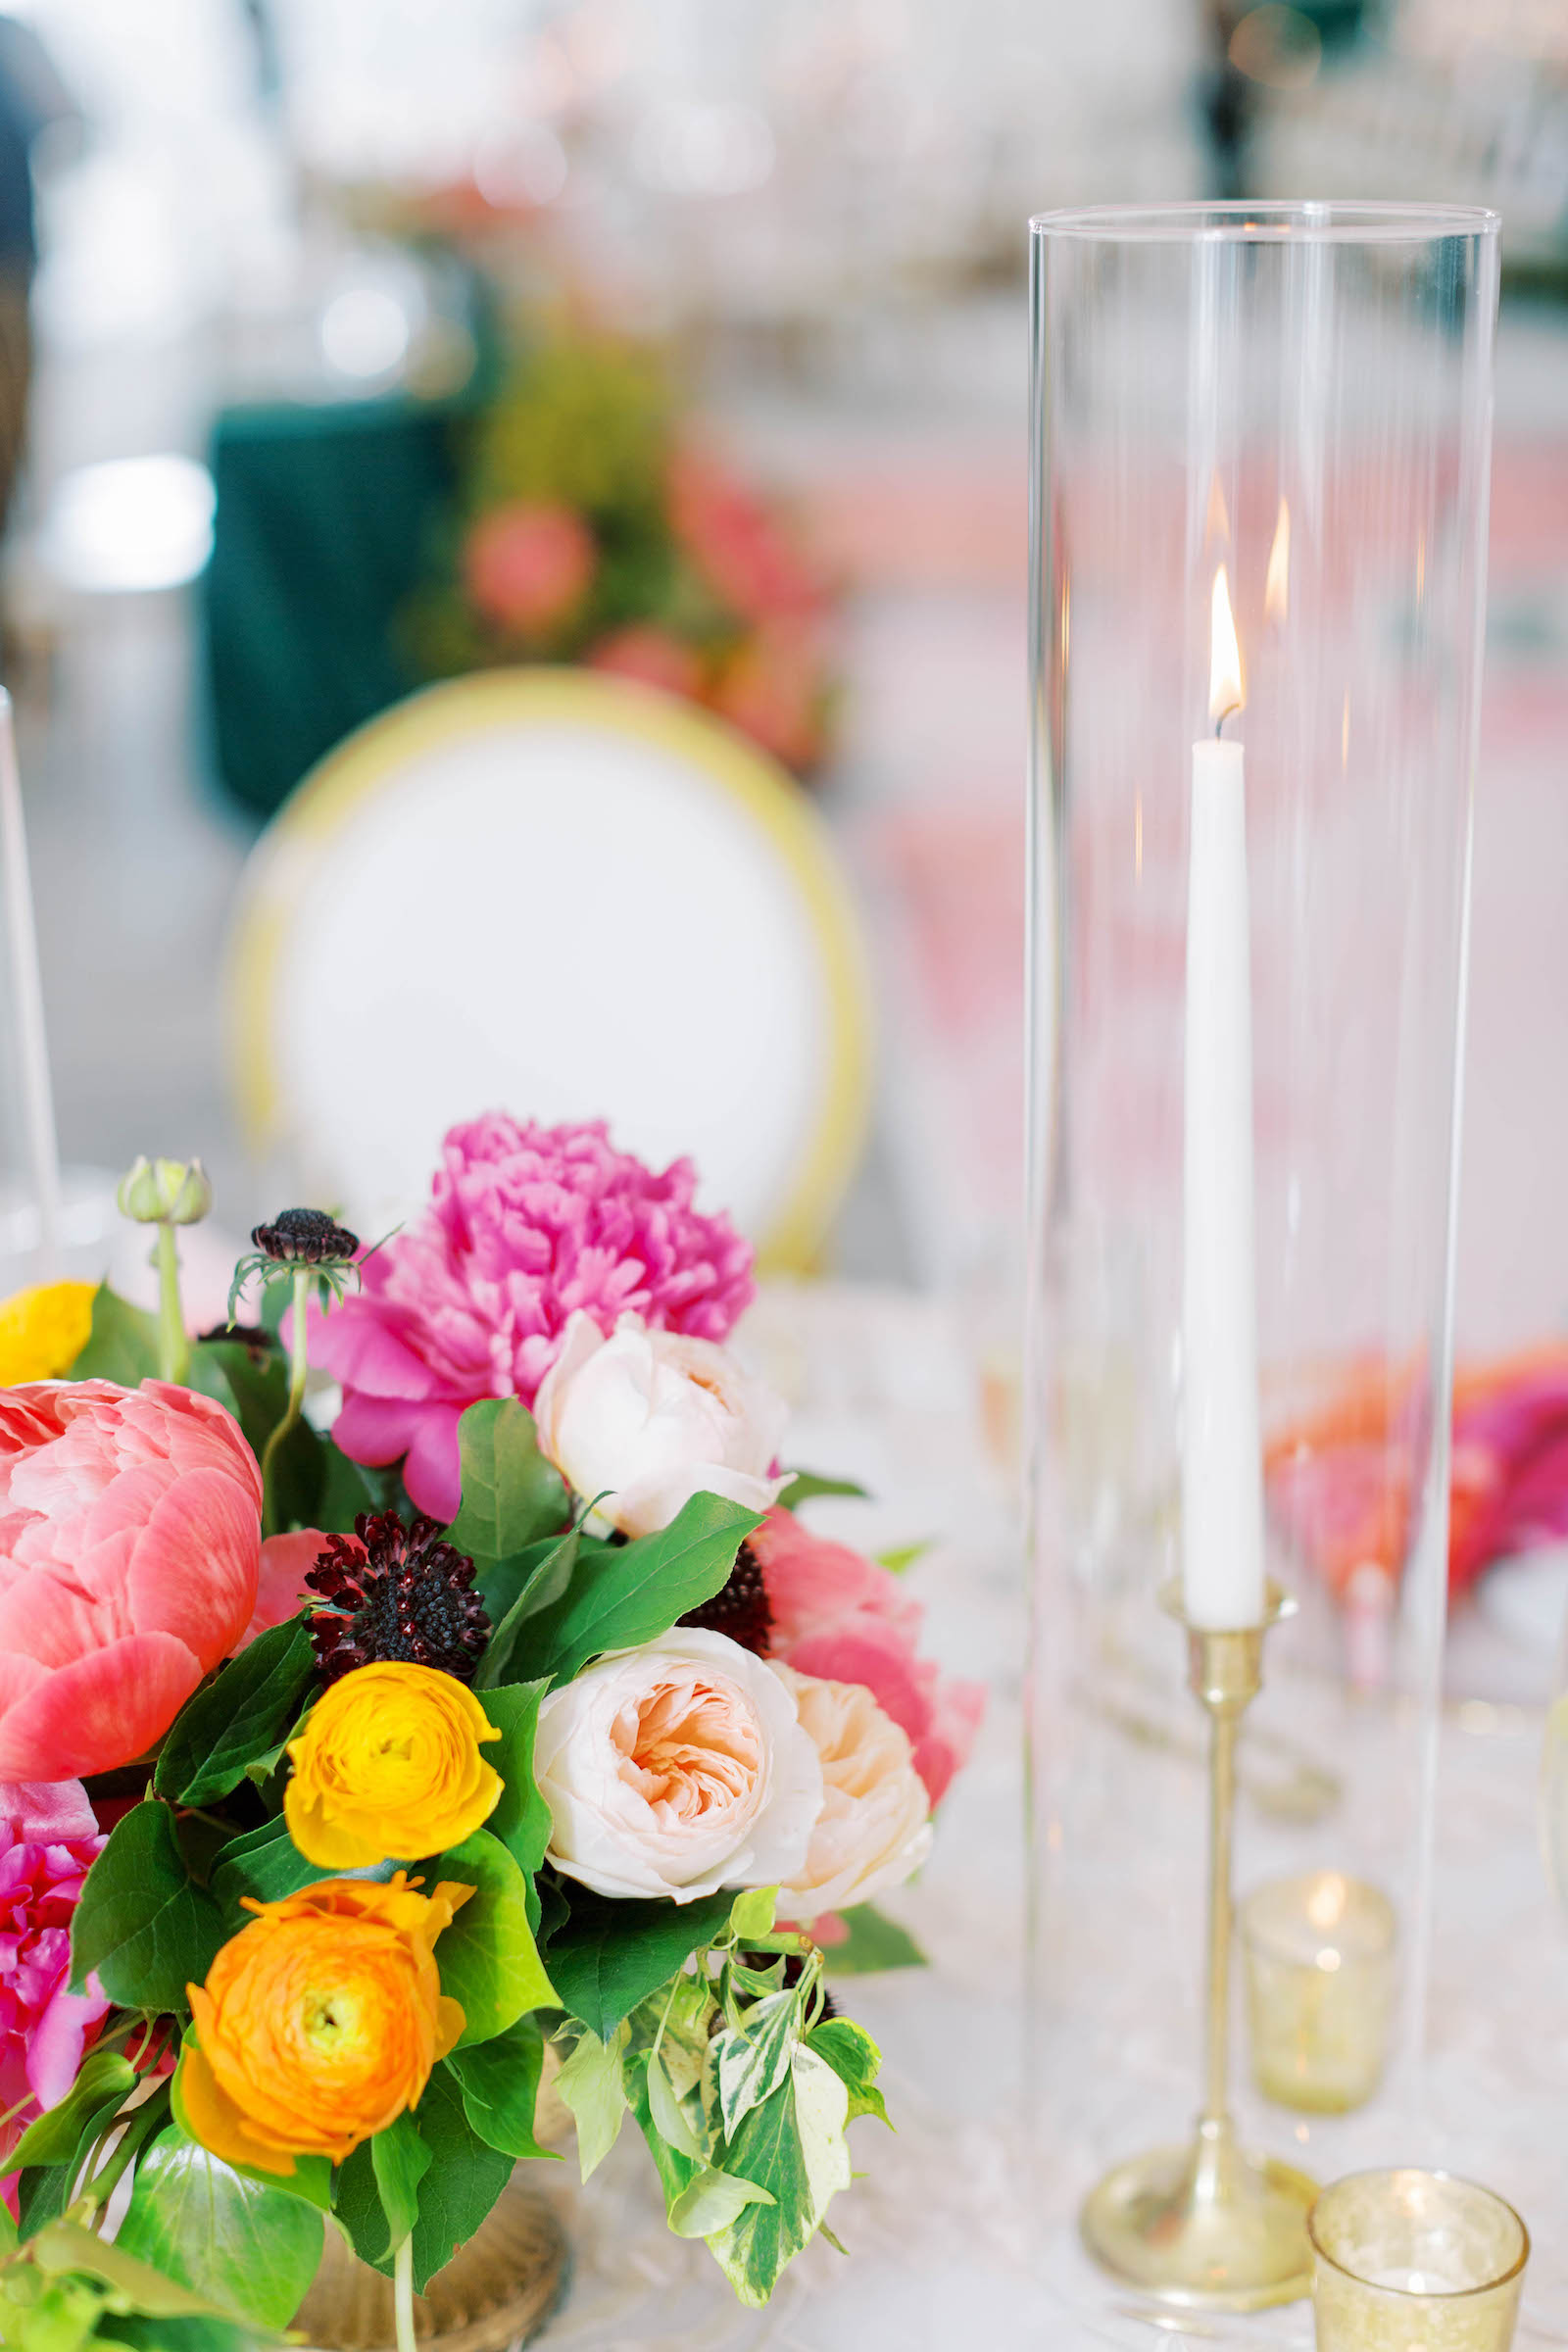 White and Gold Chairs at Wedding Reception with Hot Pink Accents | Tropical Details and Long White Candlesticks with Gold Candle Holders